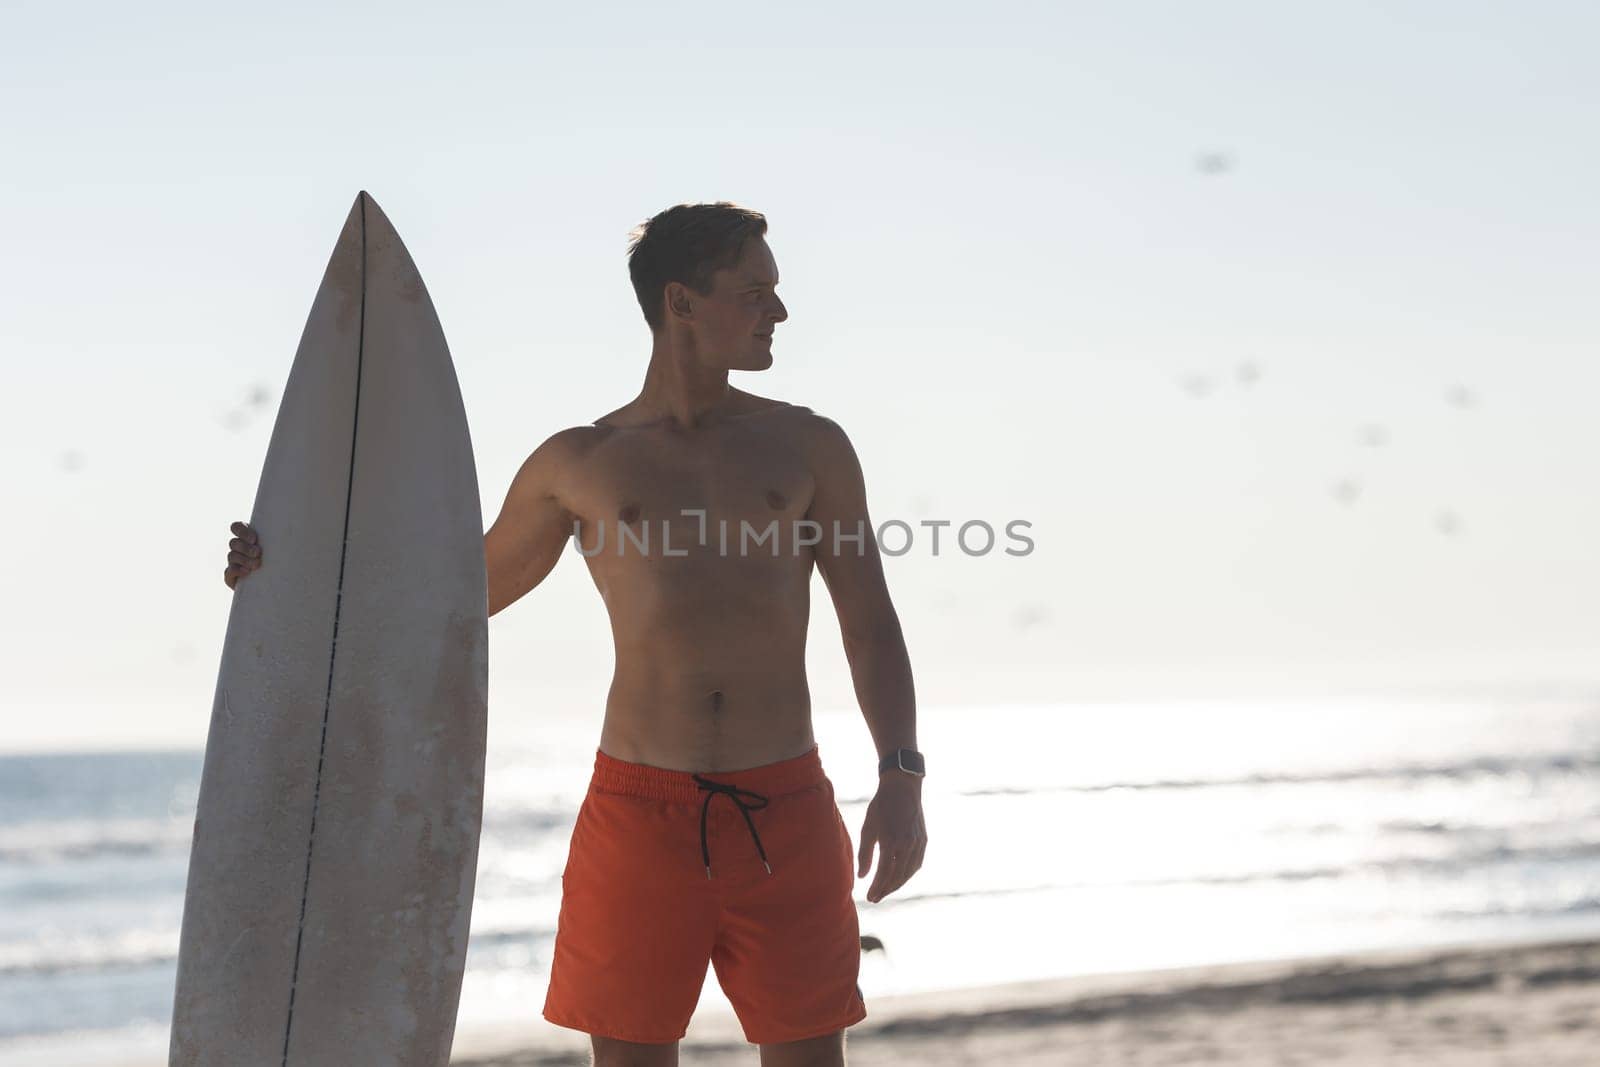 A shirtless man surfer standing on the beach holding a surfboard - looking to the side. Mid shot